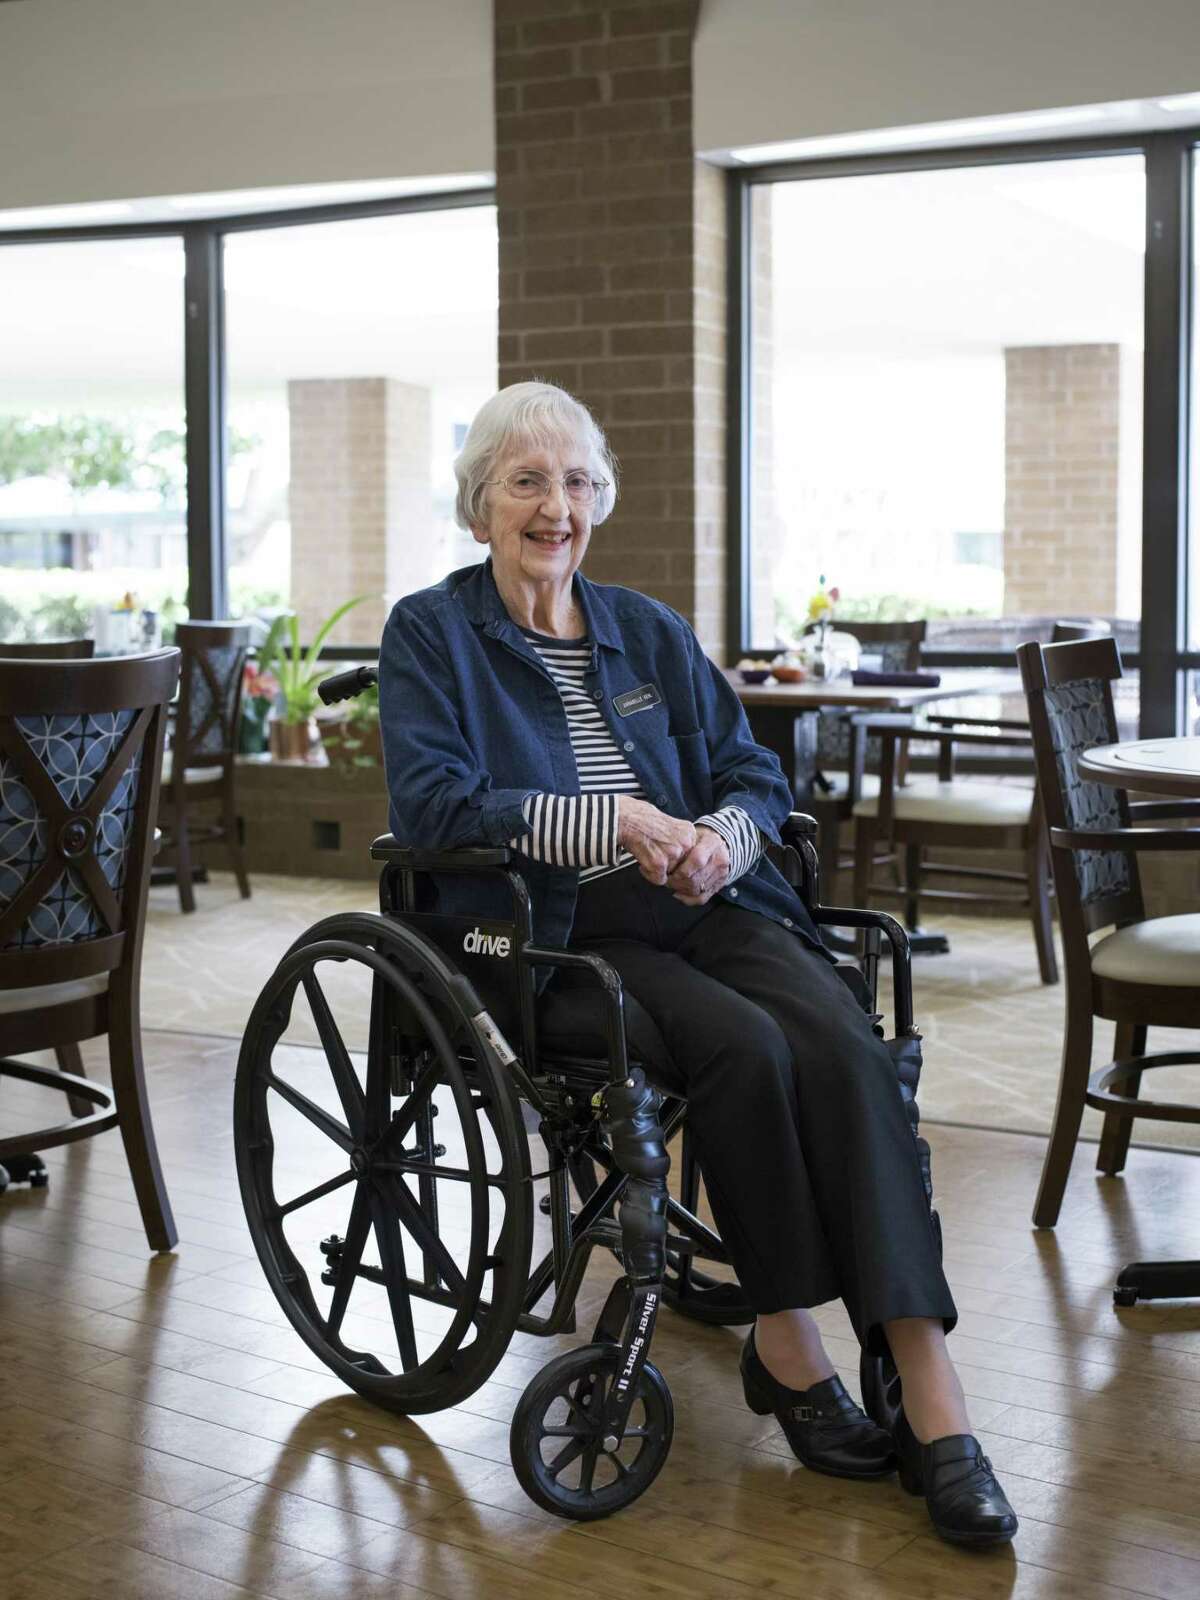 Annabelle Kehl, 94, a resident at Blue Skies of Texas since 1987, a retirement community outside of San Antonio, Texas that includes a nursing home, poses for a portrait in the dining room on Thursday, March 23, 2017. The majority of residents at Blue Skies are retired military. A proposal in the Texas legislature pushed by Sen. Juan Hinojosa, D-McAllen, would impose a fee on nursing home resident beds, including those which are private-pay. Companies such as Blue Skies of Texas would be forced to pay this fee, but are not convinced that they will be reimbursed by this new legislation.